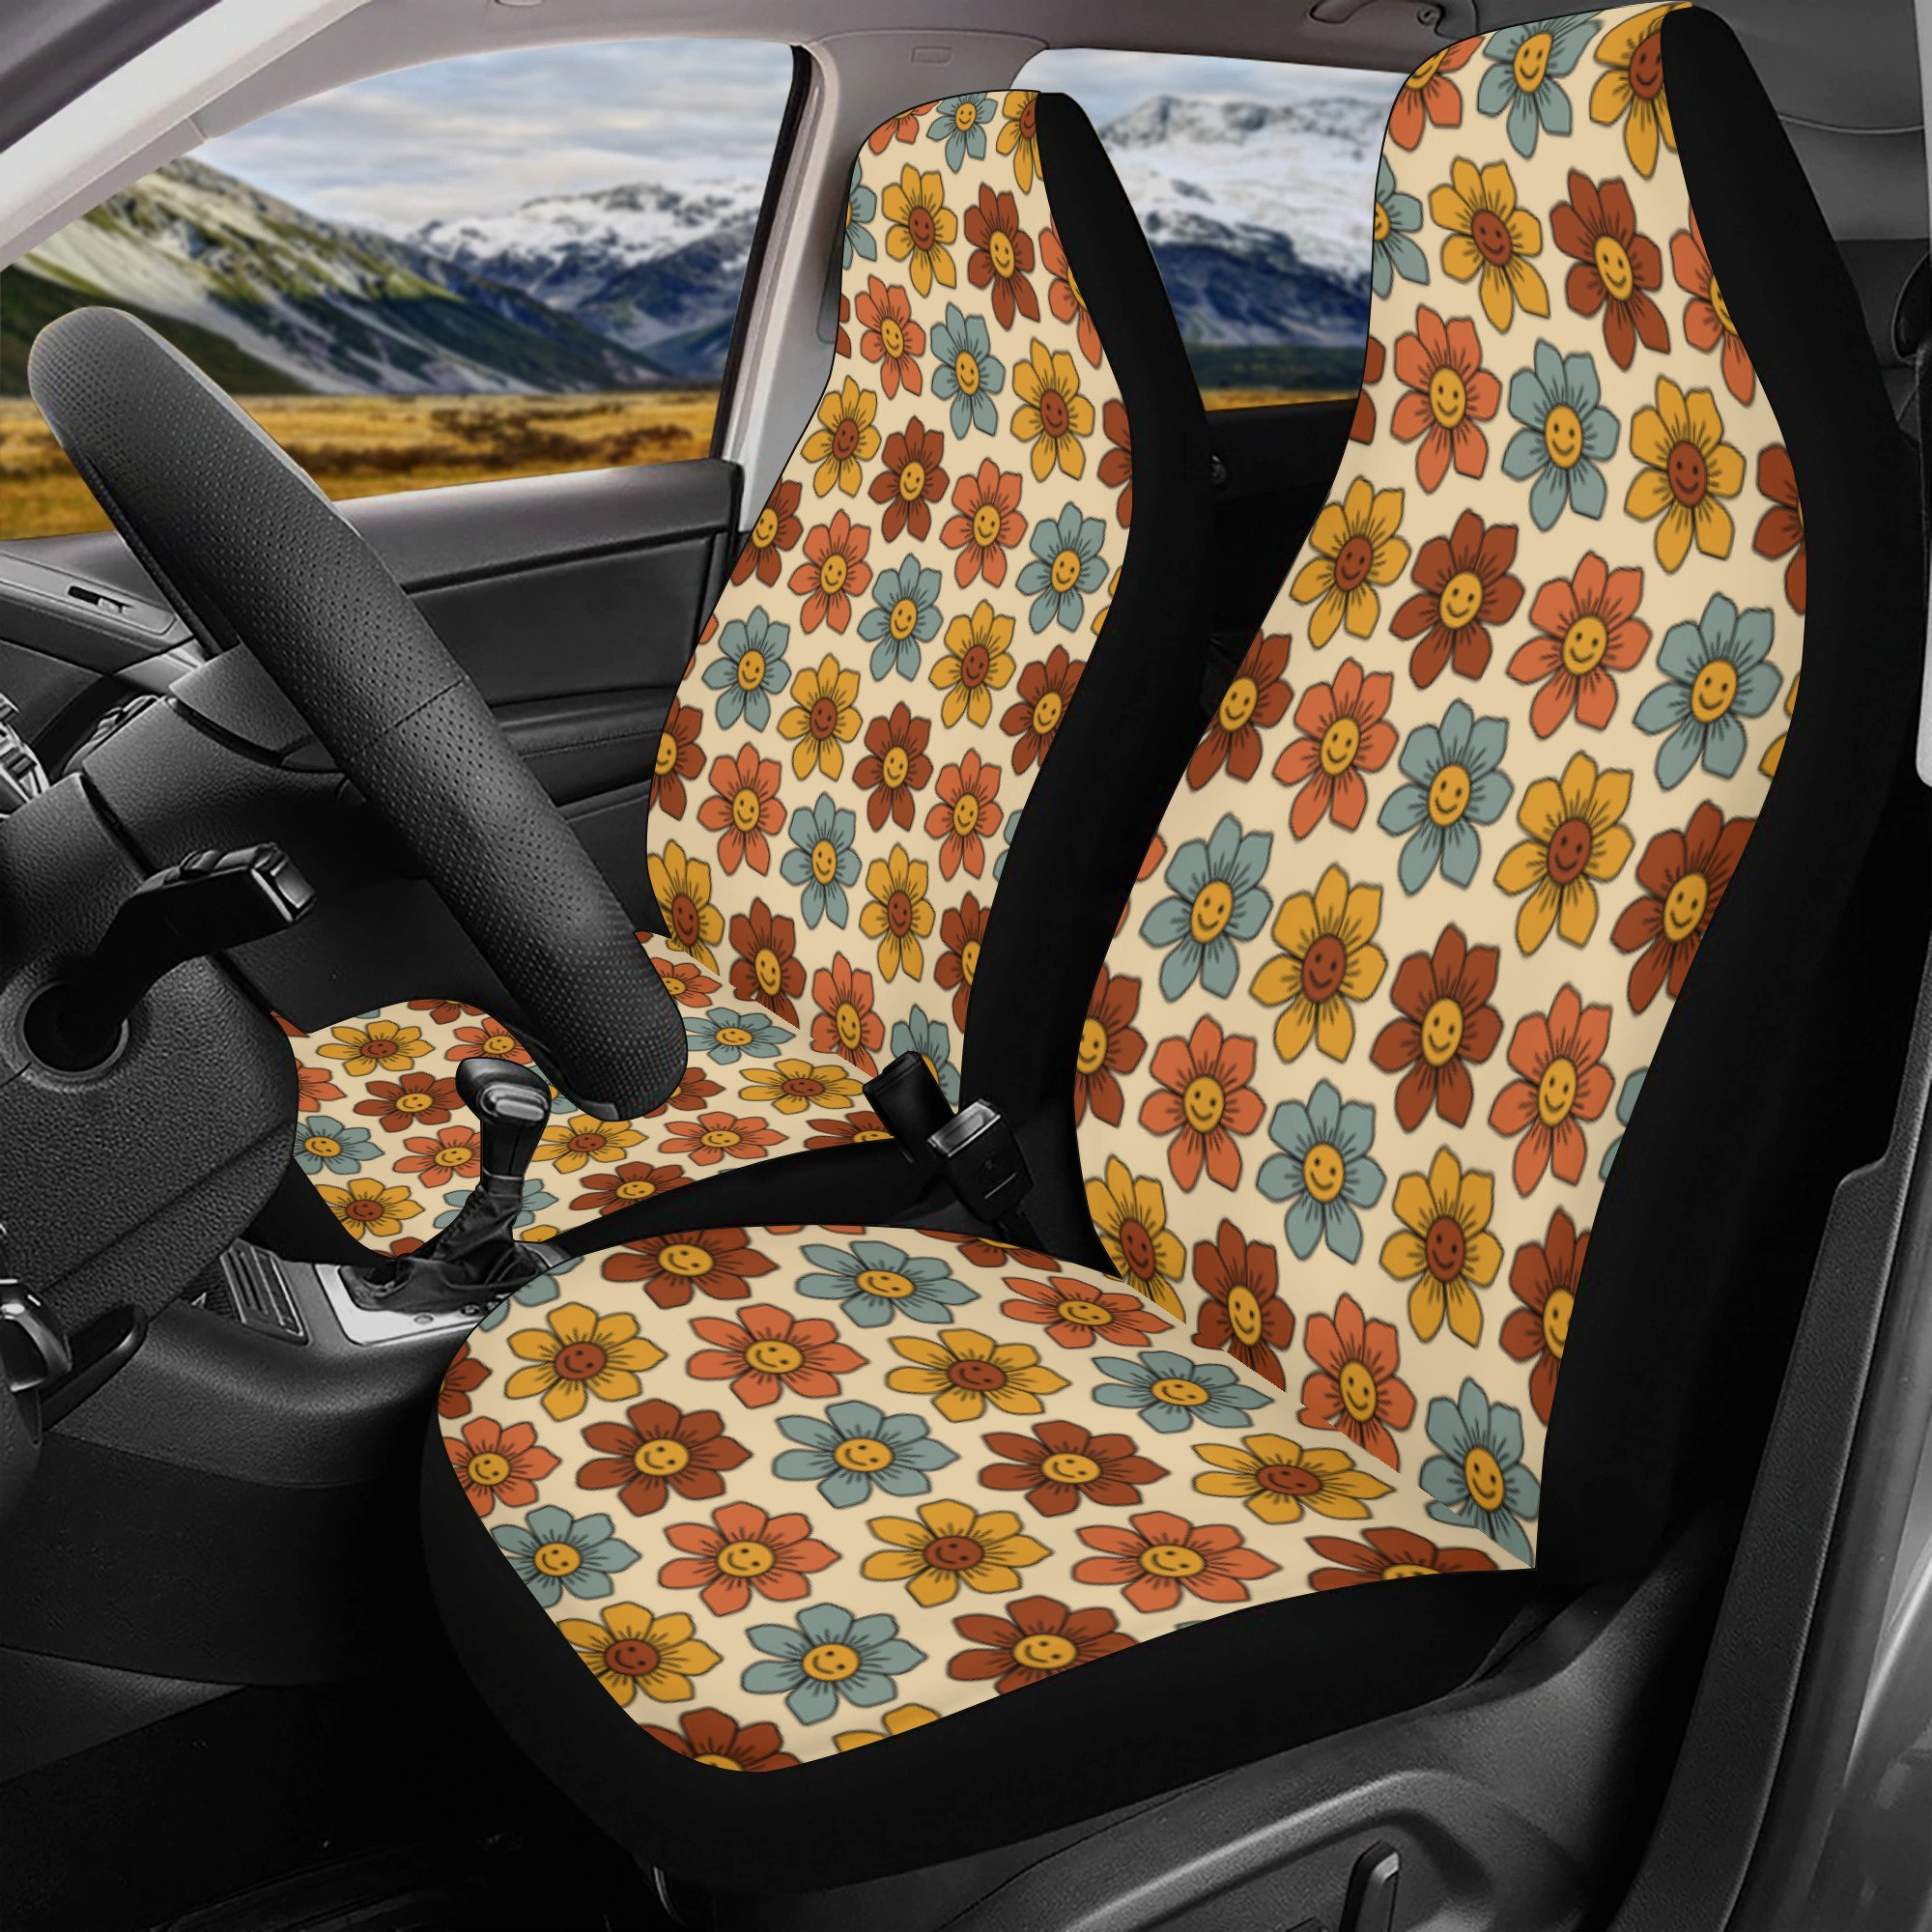 Smiley Flower Seat Cover for Car